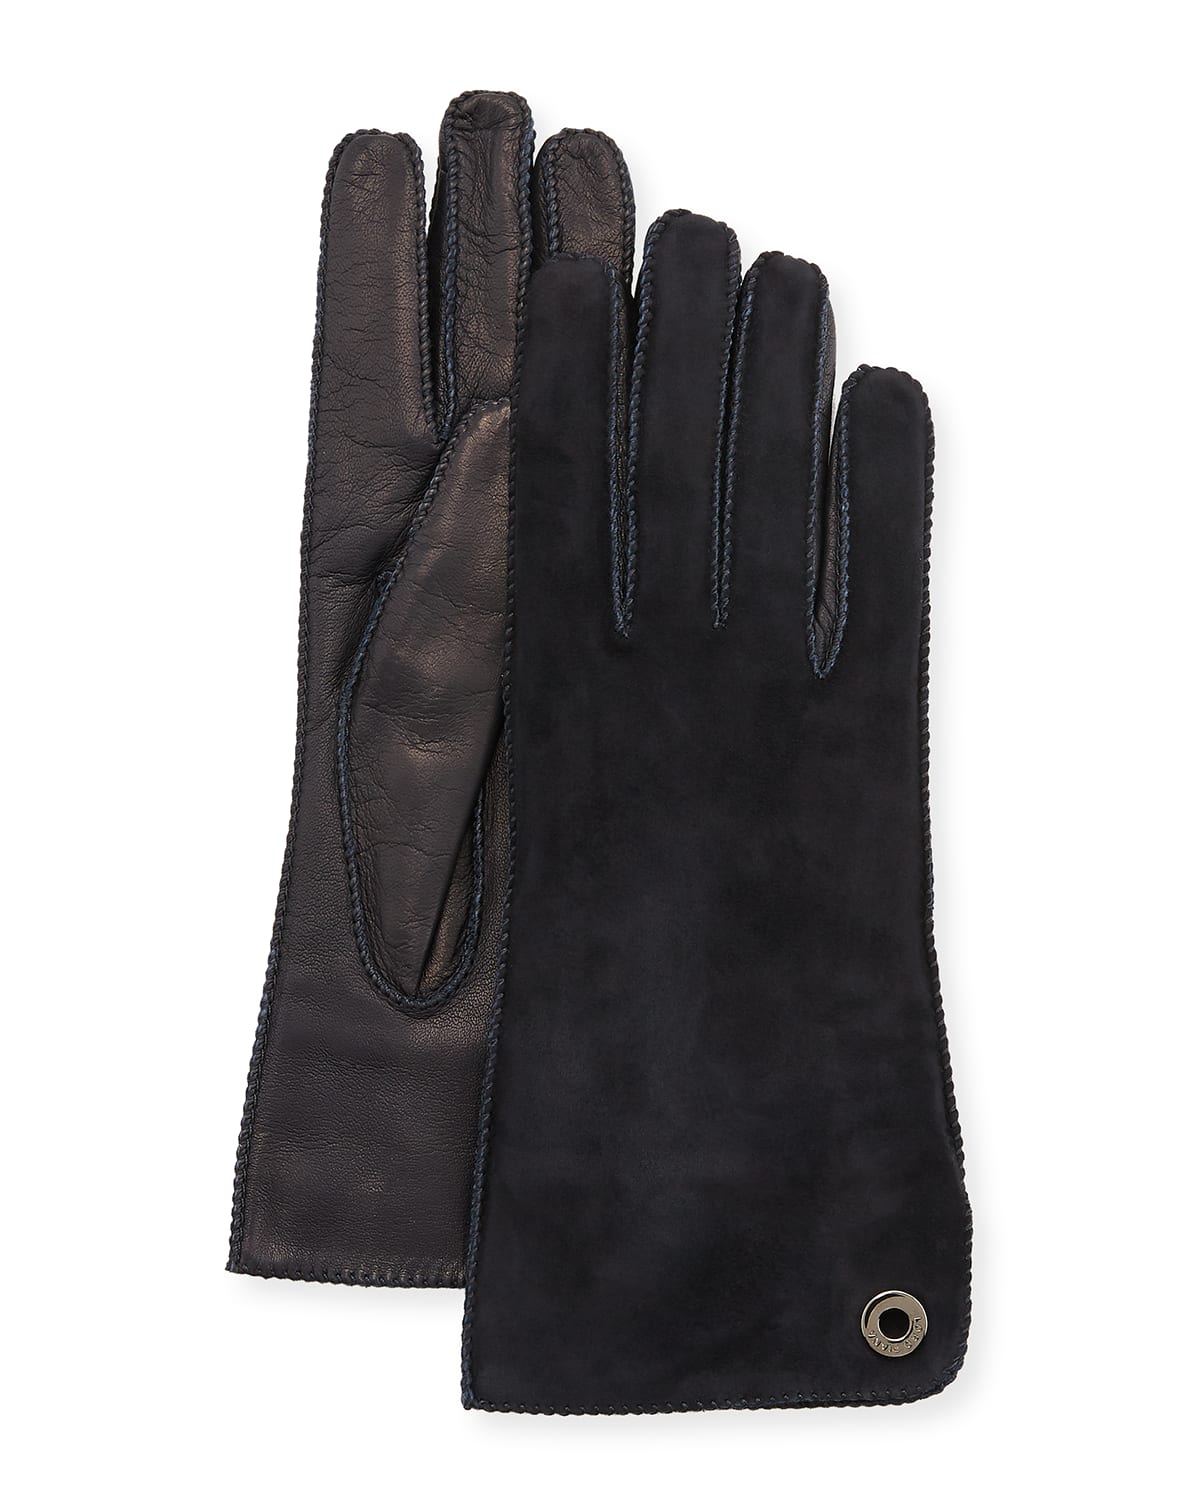 Loro Piana Jacqueline Suede And Leather Gloves In Medium Gray